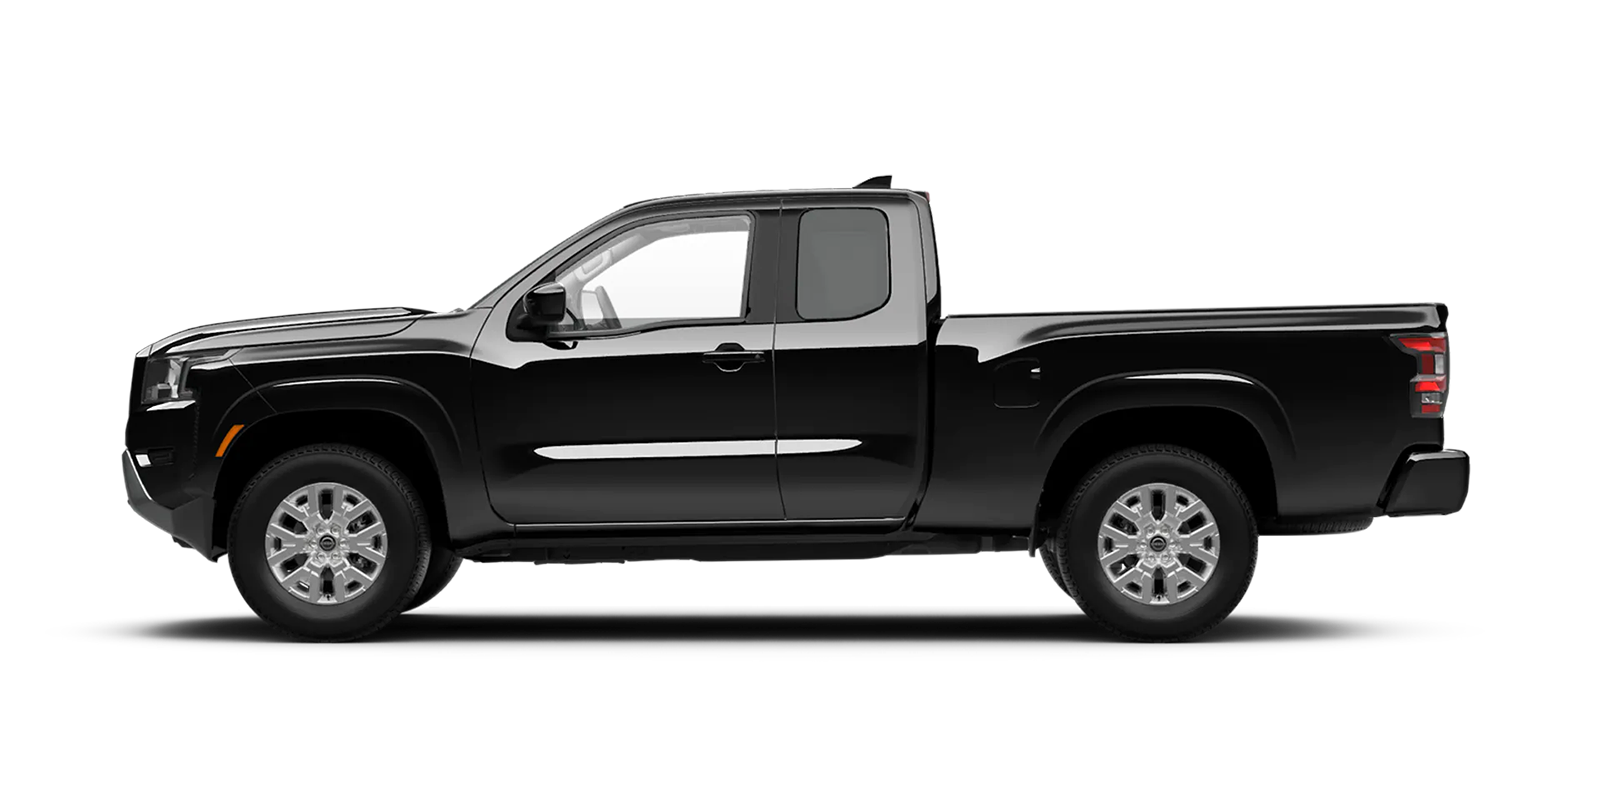 2022 Frontier King Cab SV 4x2 in Super Black | Nissan City of Springfield in Springfield NJ